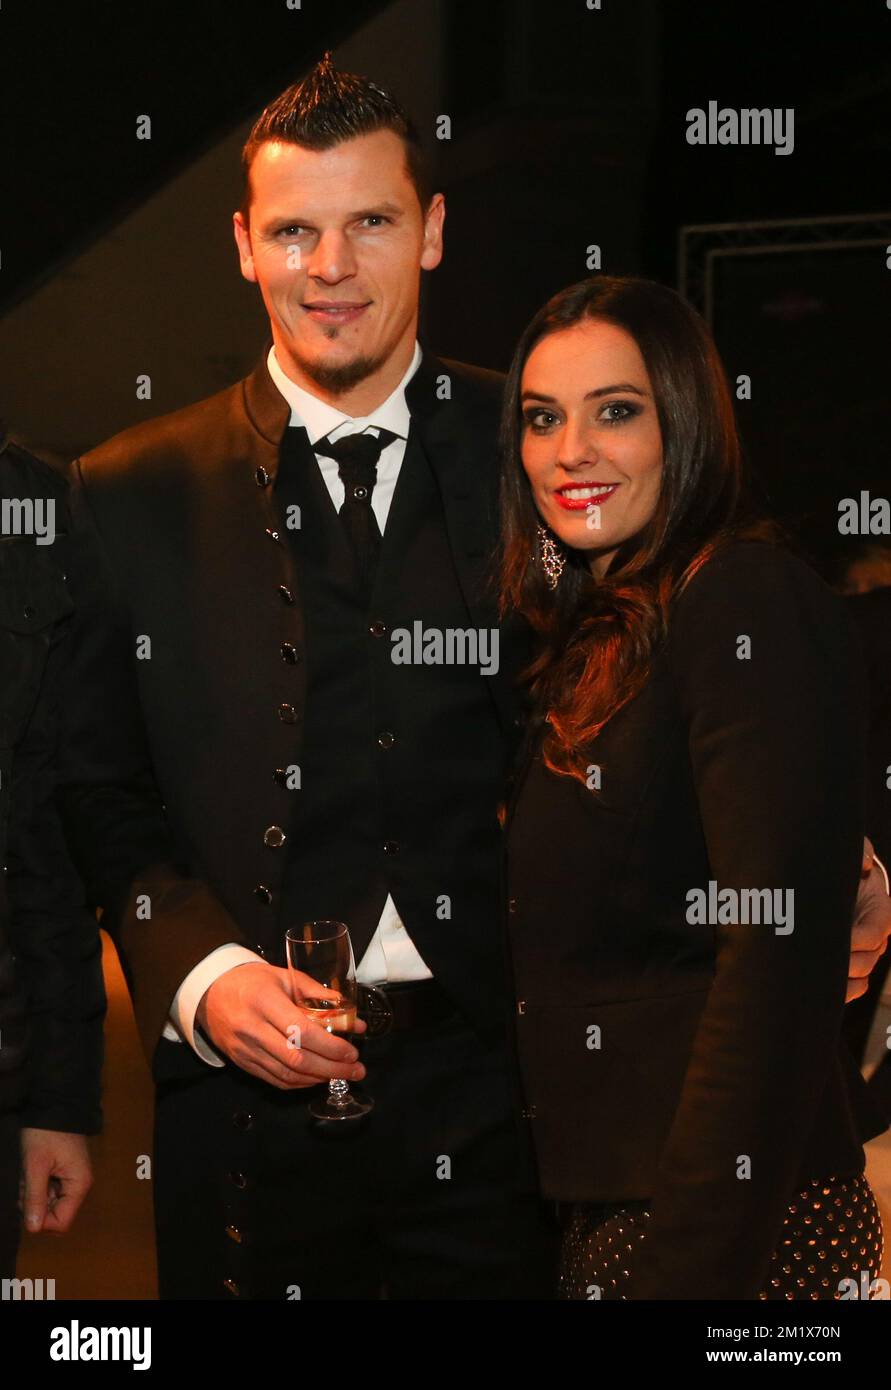 Former Red Devil Daniel Van Buyten and his wife Celine pictured before the Gala evening 'Sport and Fashion evening', a charity gala for two associations, the Constant Van Den Stock foundation and Justine 4 Kids, in the Spiroudome, in Charleroi, Wednesday 19 November 2014. Stock Photo